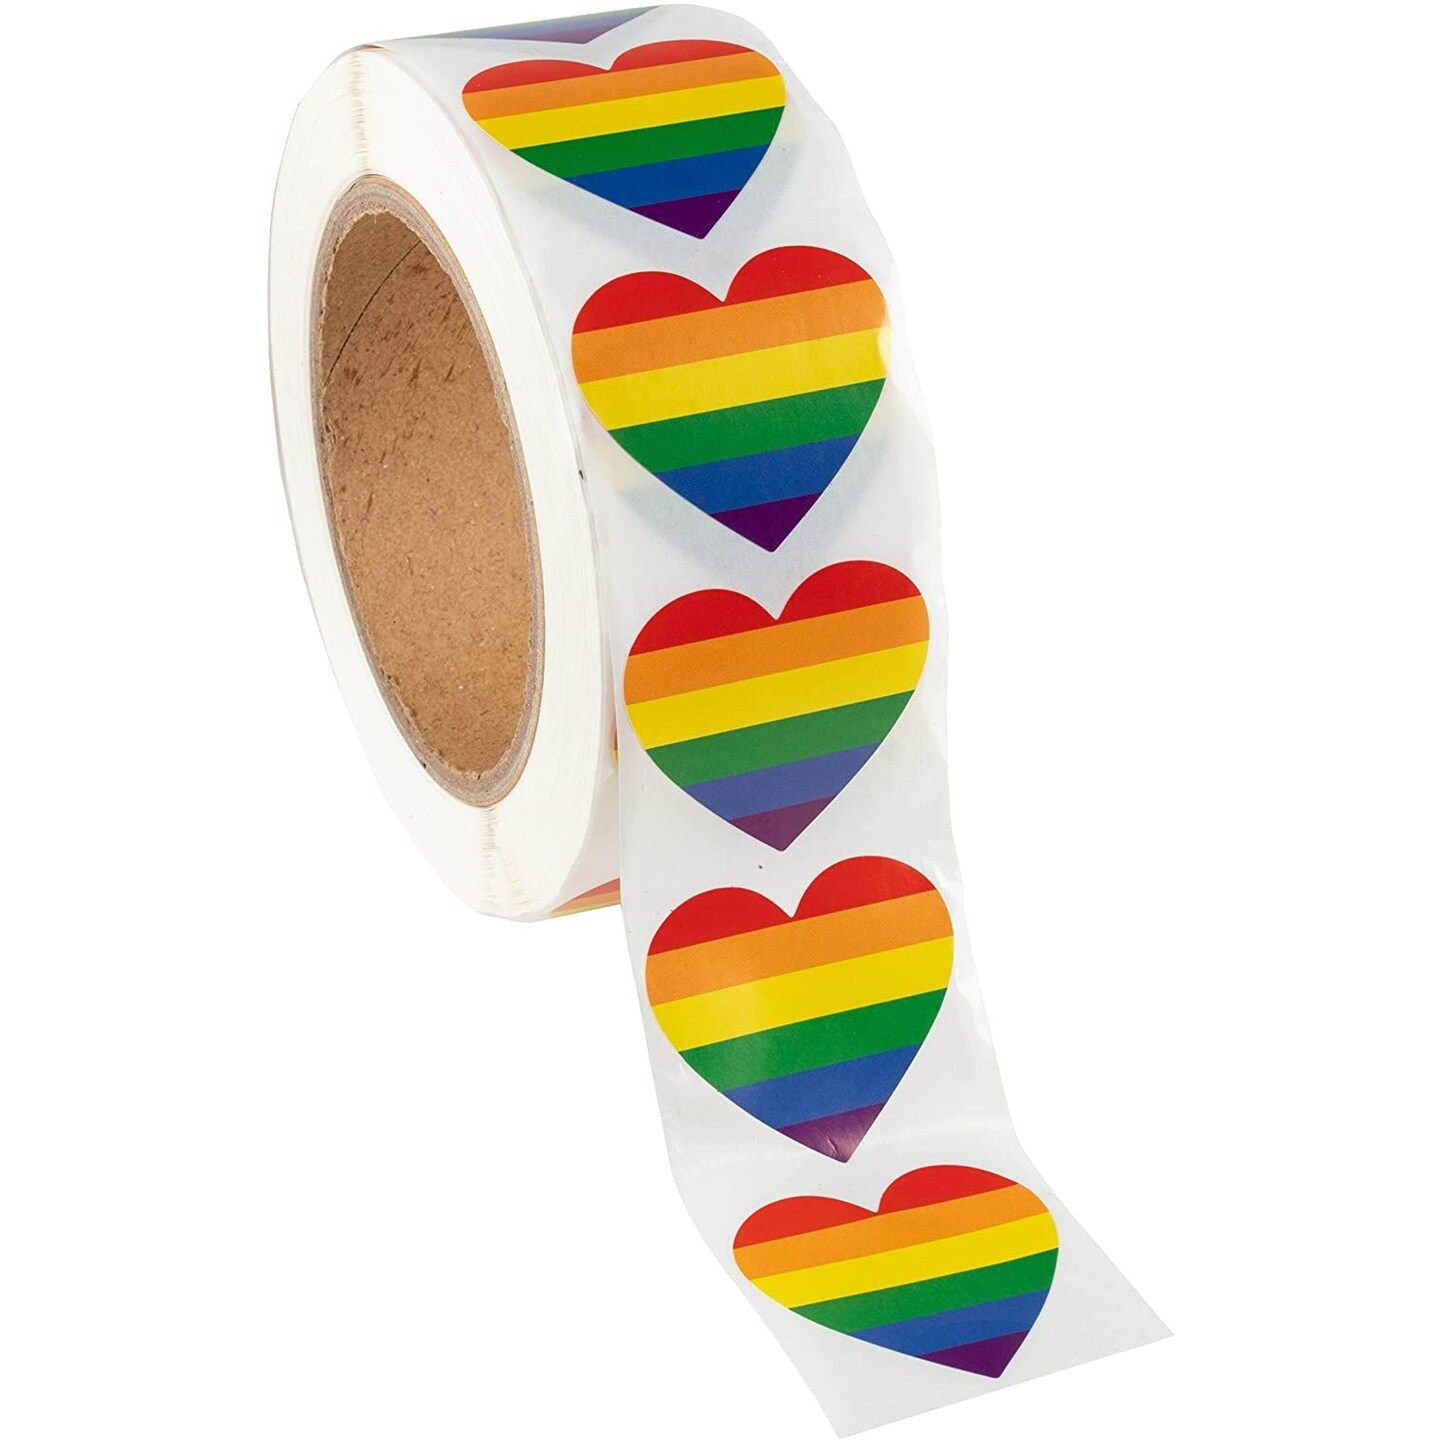 Juvale Gay Pride Self Adhesive Sticker Roll, Rainbow Heart (1.5 x 1.7 in,  1000 Pack)